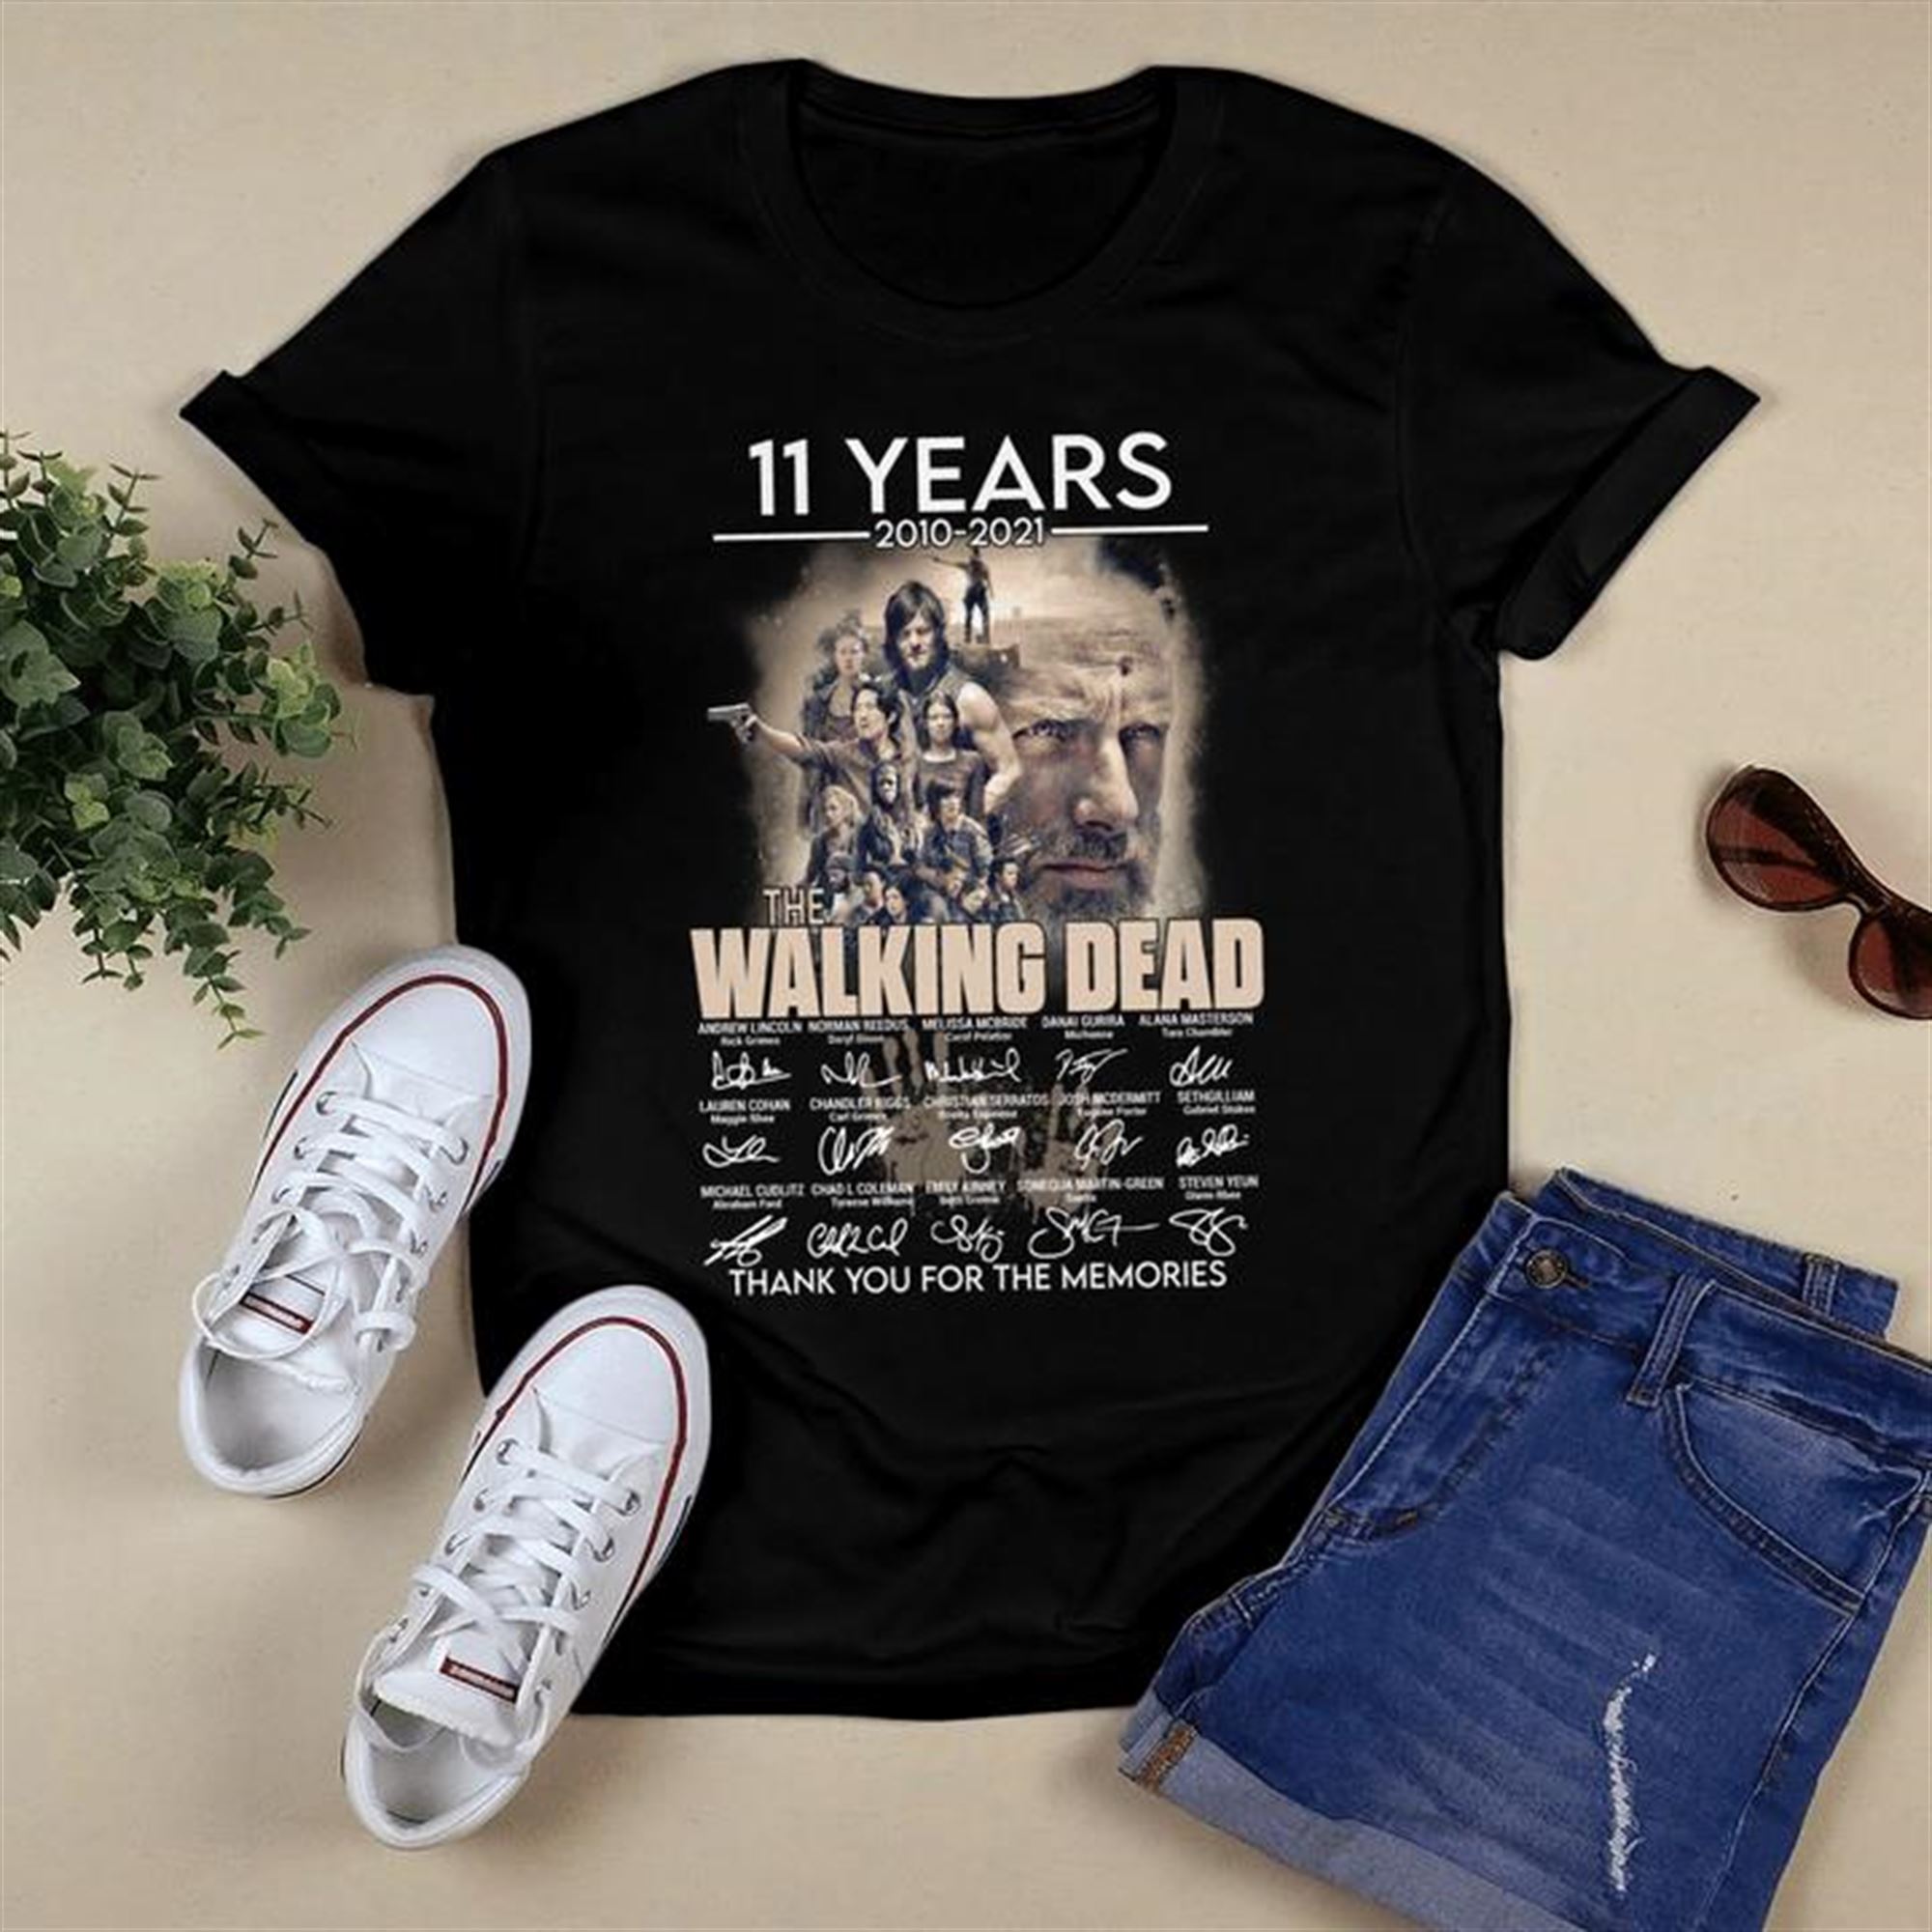 The Walking Dead Thank You For The Memories Signature T-shirt Full Size Up To 5xl